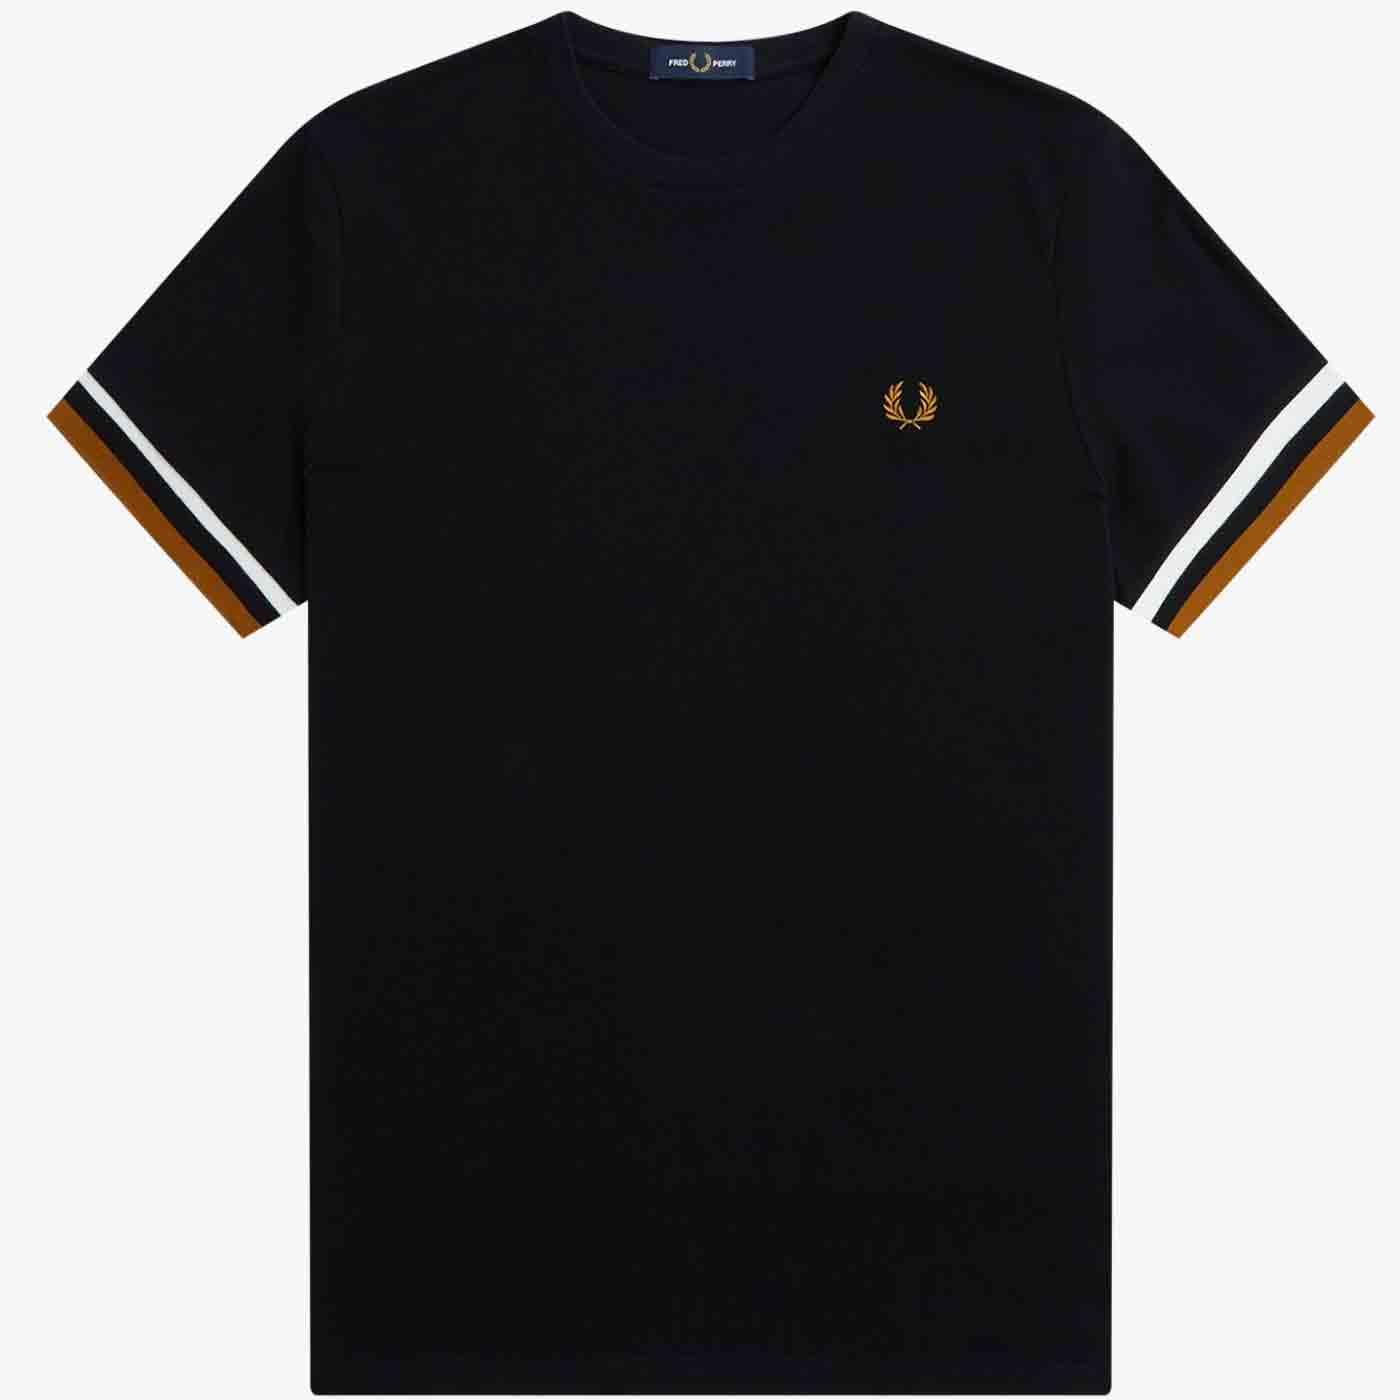 Fred Perry Retro Mod Bold Tipped Pique Tee Black